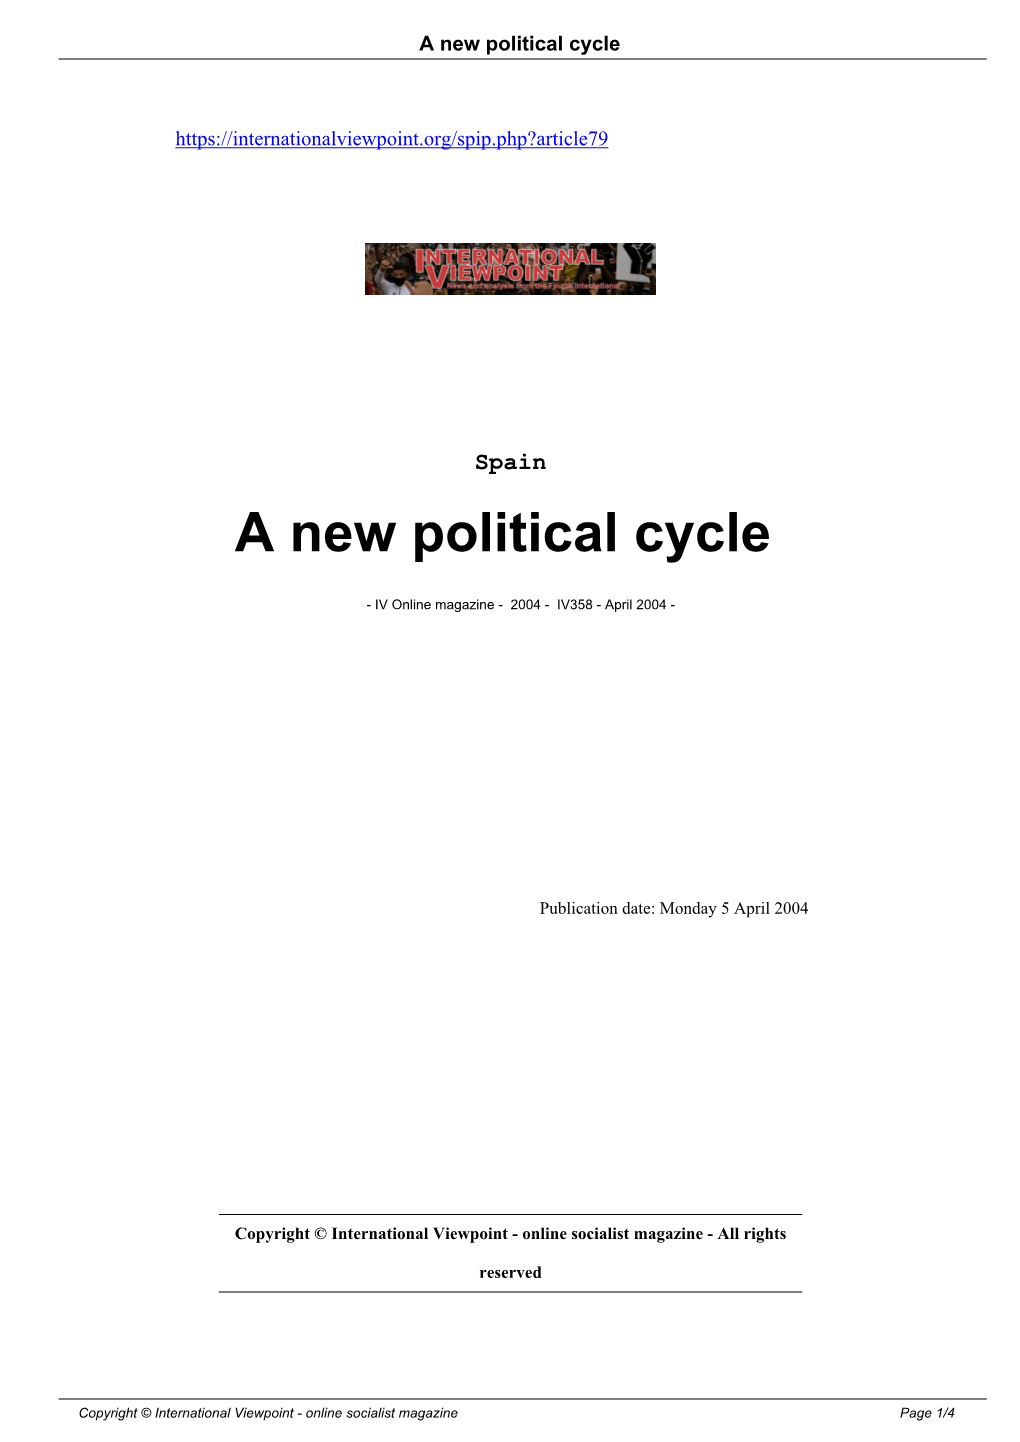 A New Political Cycle